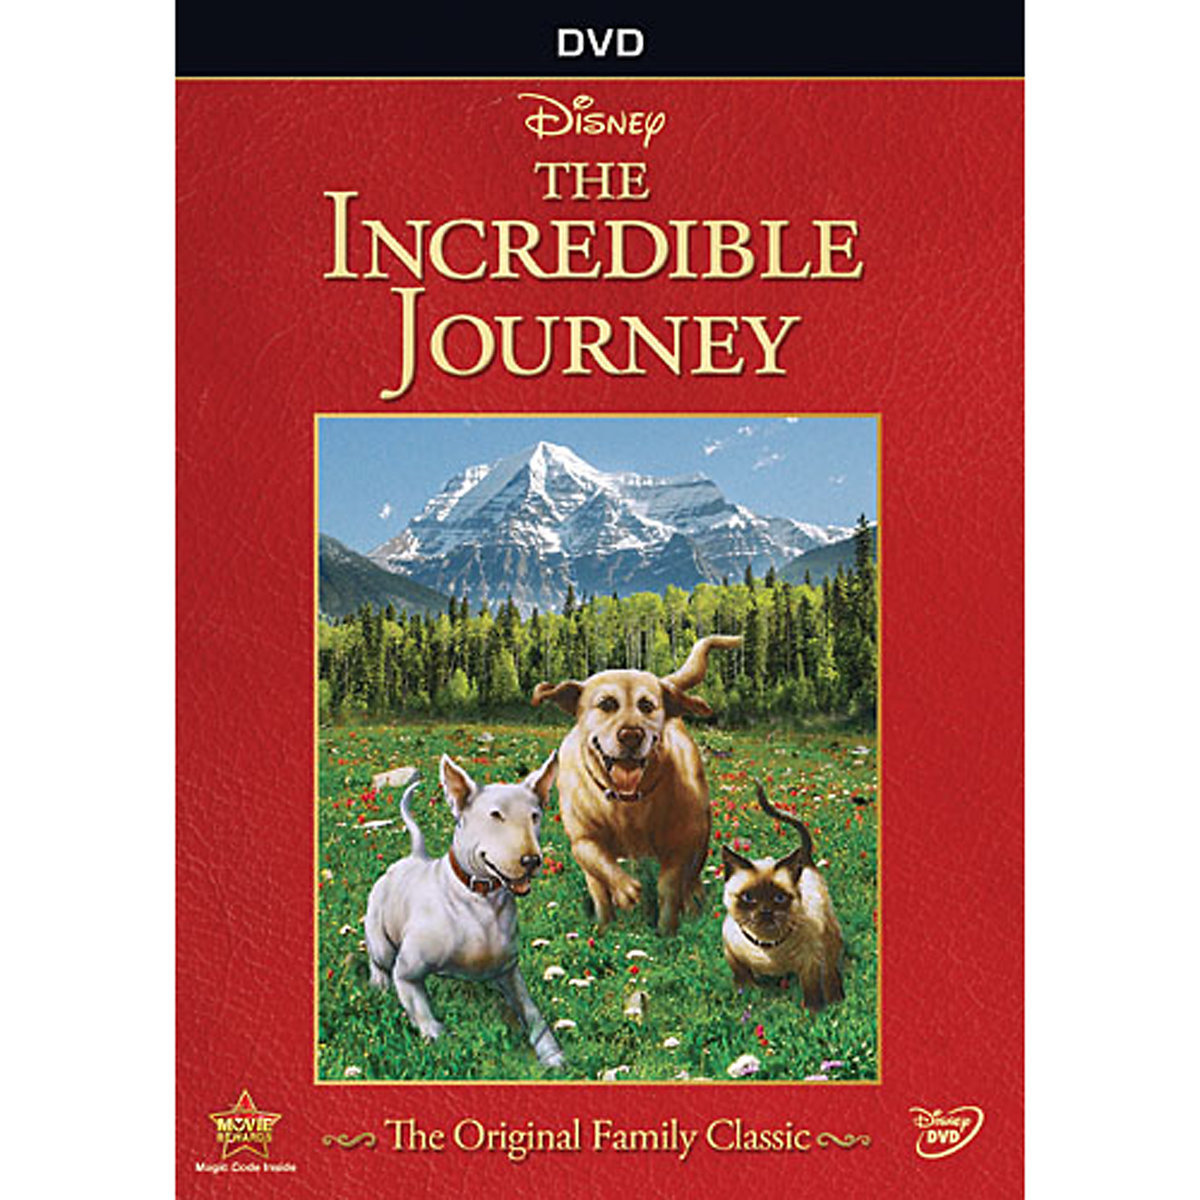 the incredible journey book summary